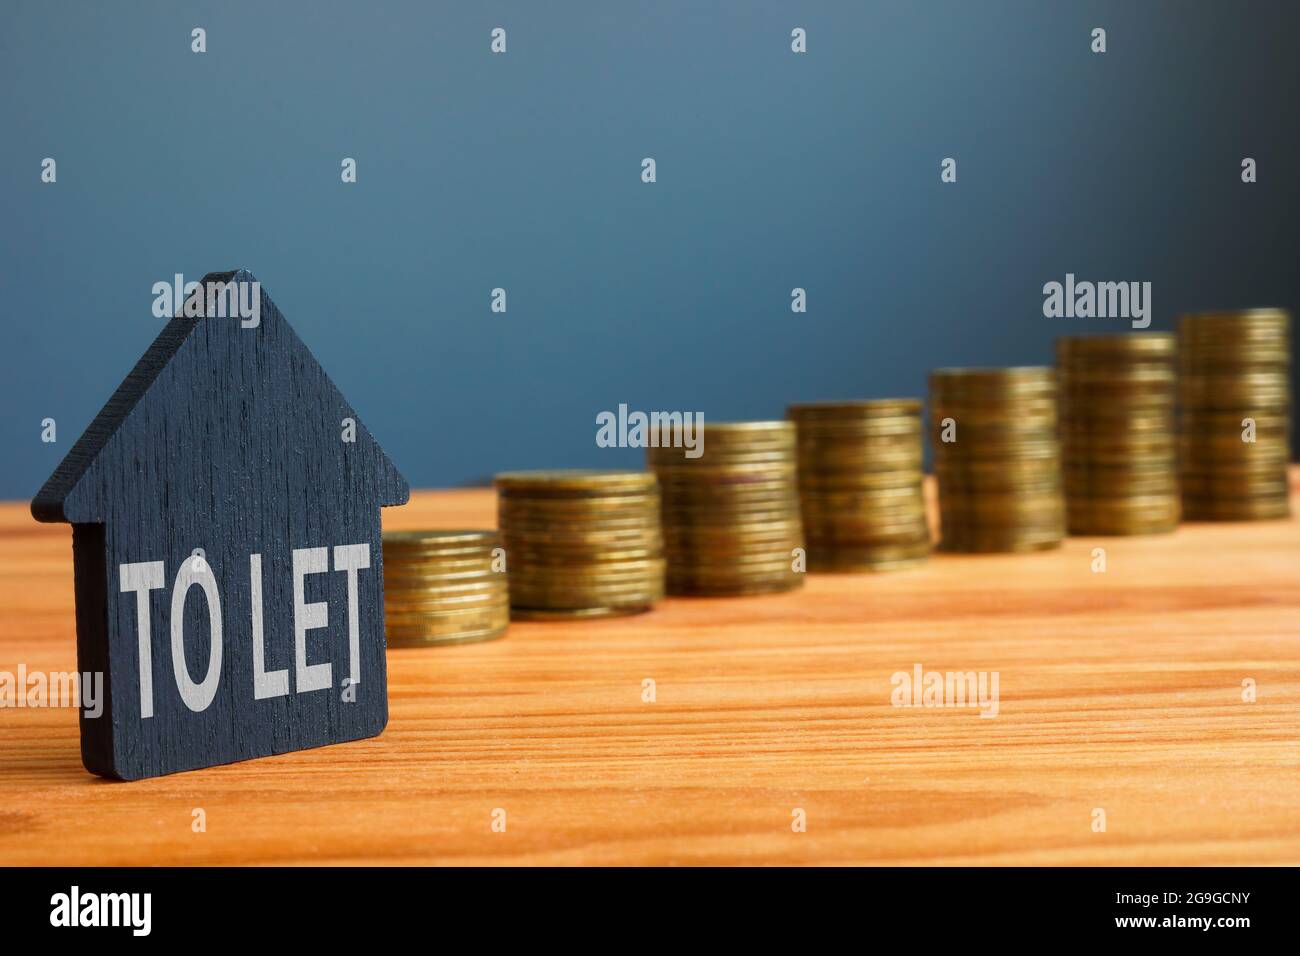 Buy to let on the small house and coins. Stock Photo